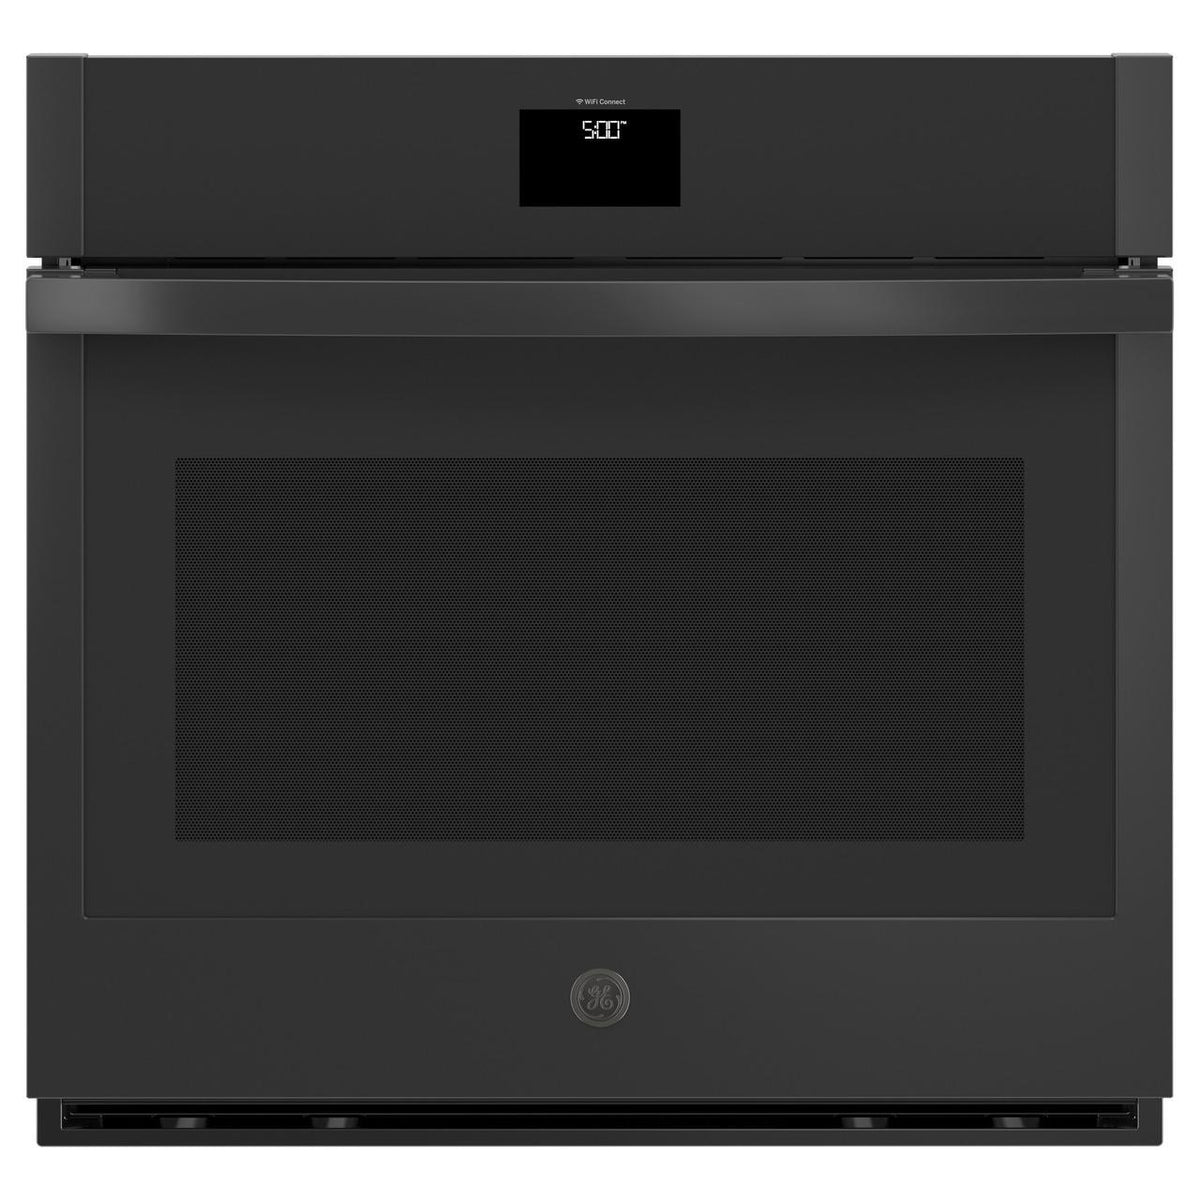 30-inch, 5.0 cu. ft. built-in Single Wall Oven with True European Convection JTS5000DVBB IMAGE 1